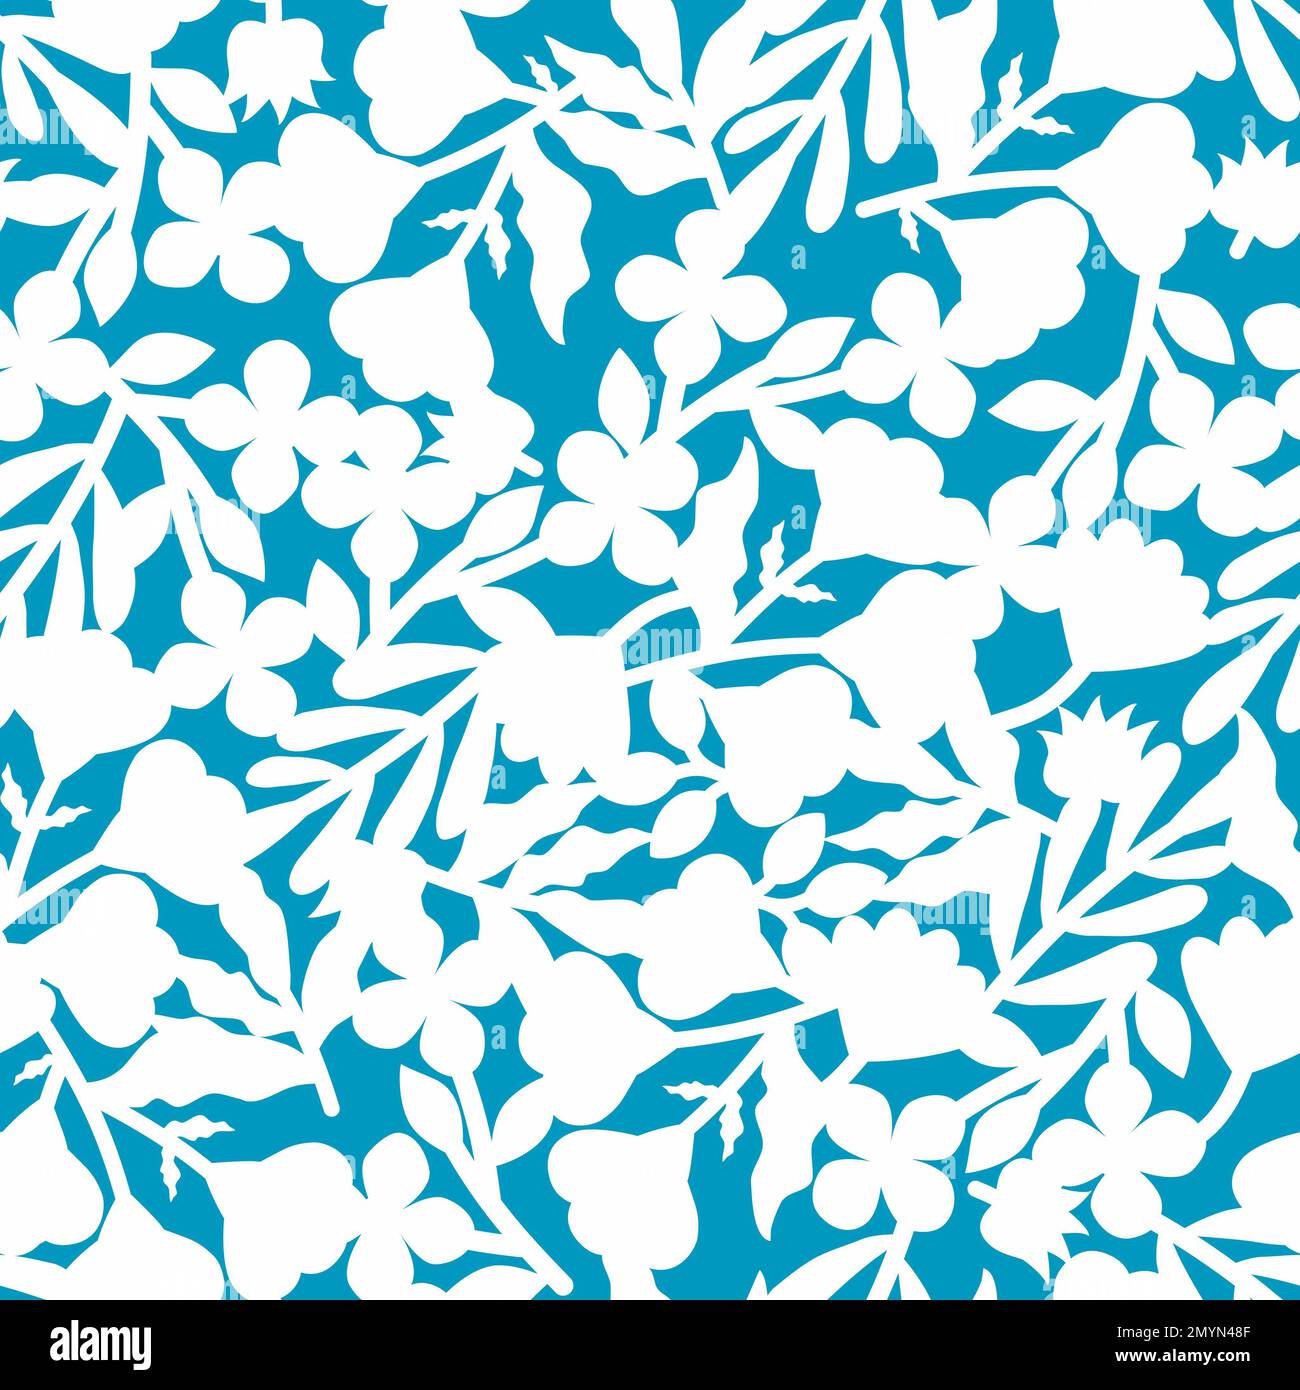 Floral seamless pattern. Silhouettes of flowers on blue background. White and blue fashion print. Stock Photo